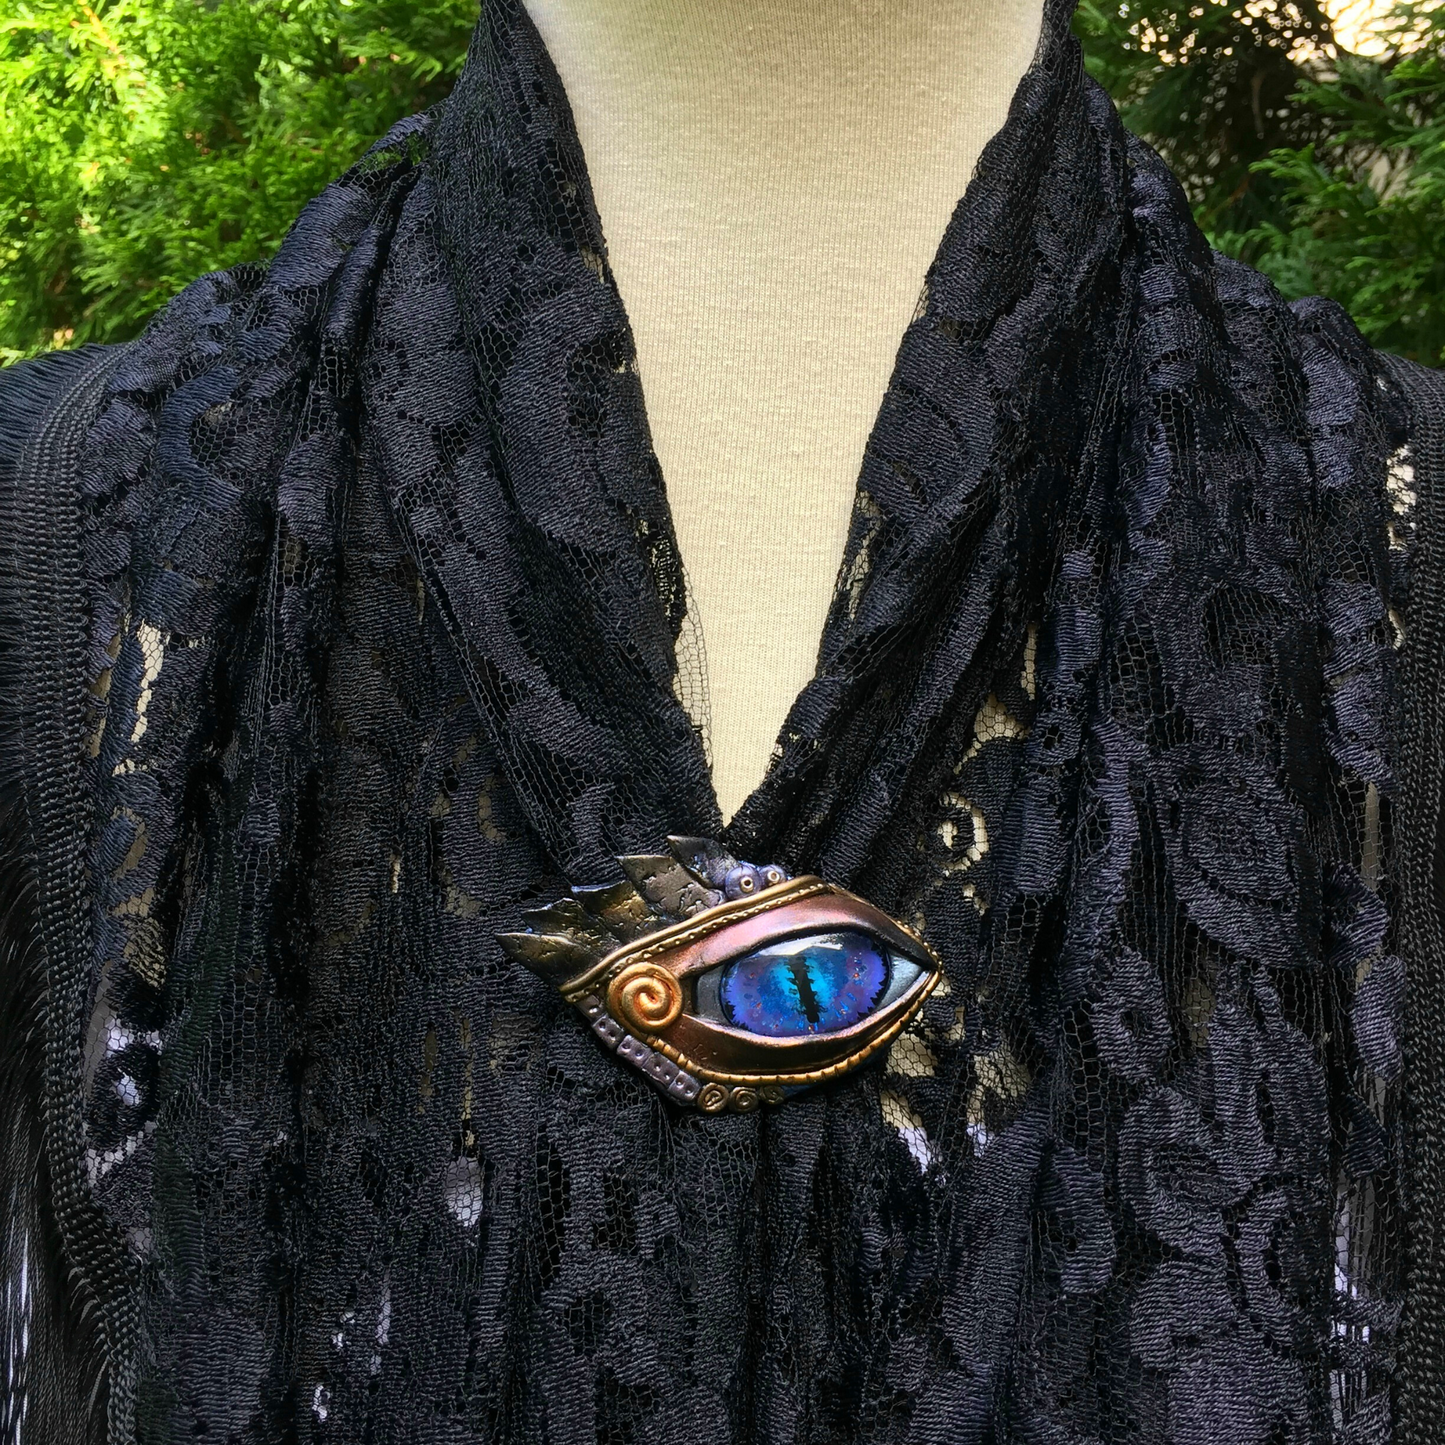 A polymer clay egyptian blue eye brooch with gold, silver feather and swirl details on a lace  shawl on model.